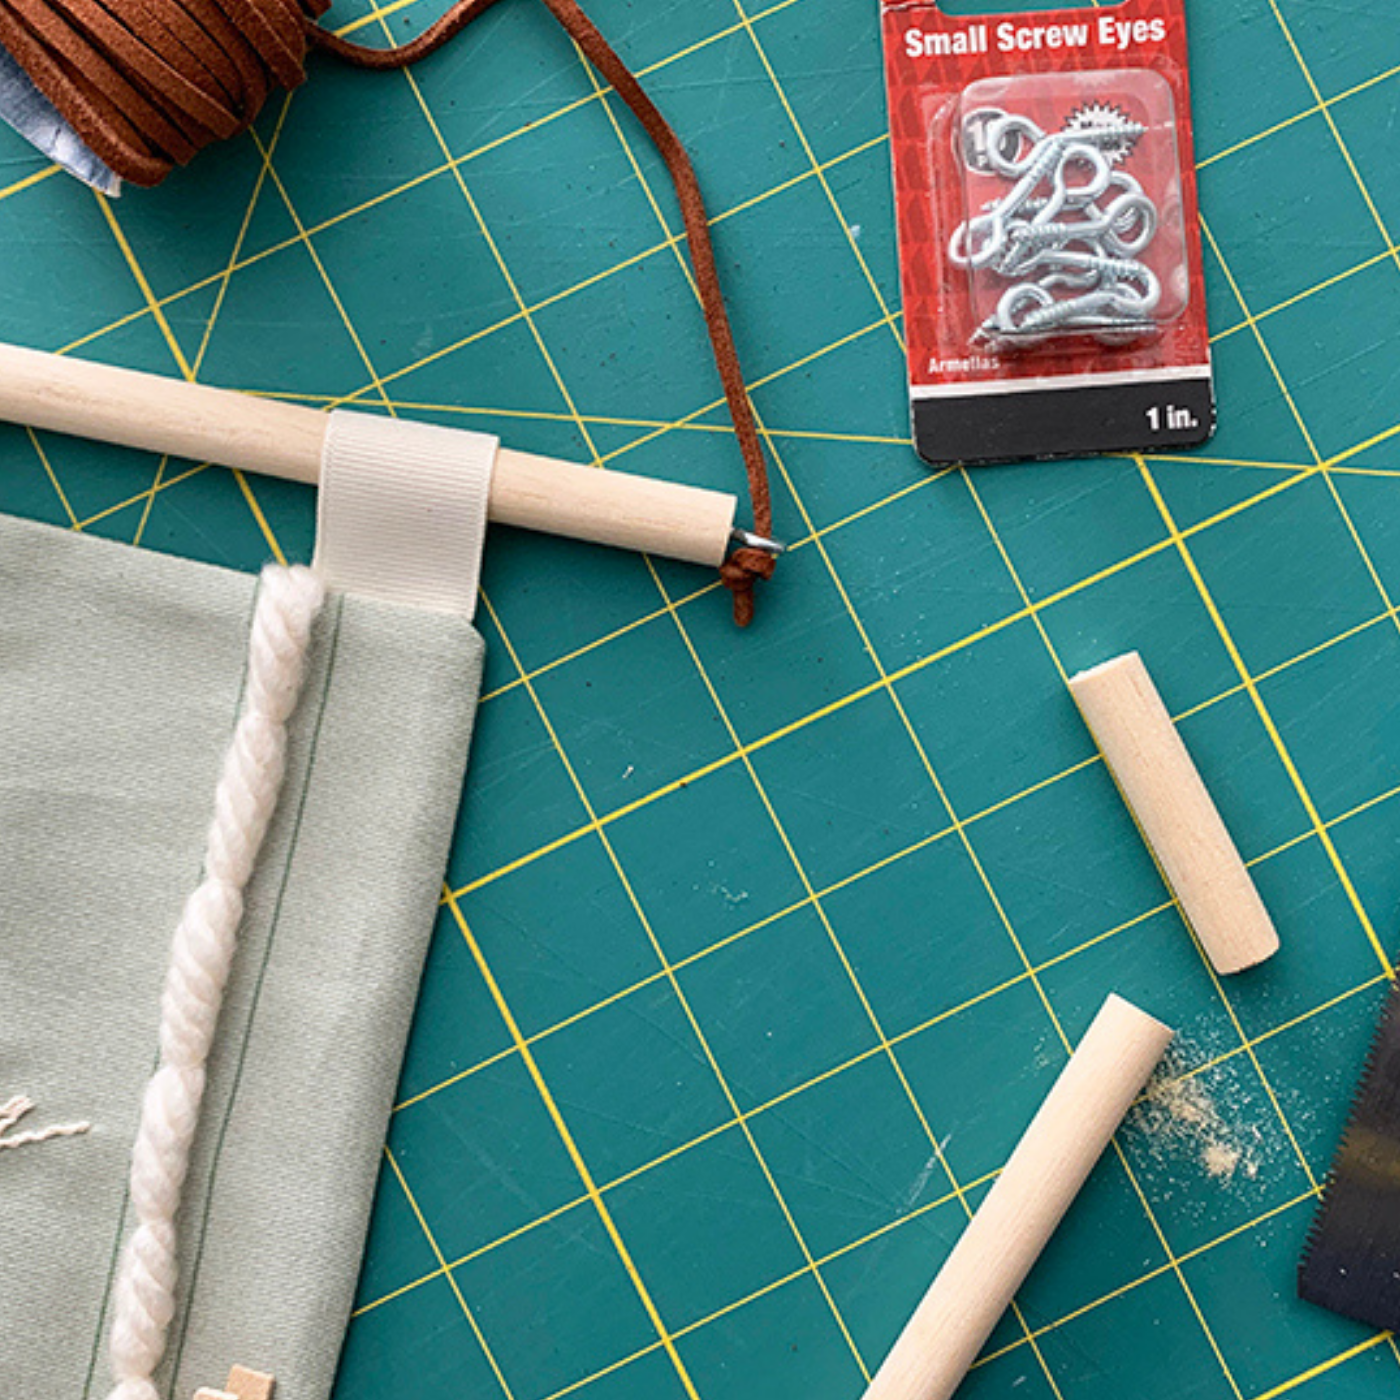 A close up of materials used to make a holiday card holder, some sawed-off bits of a small wooden dowel rod, a package of small white screw hooks, and a spool of brown twine, sit next to the holiday card holder itself, which is made of fabric and has a wooden dowel rod running across the top.